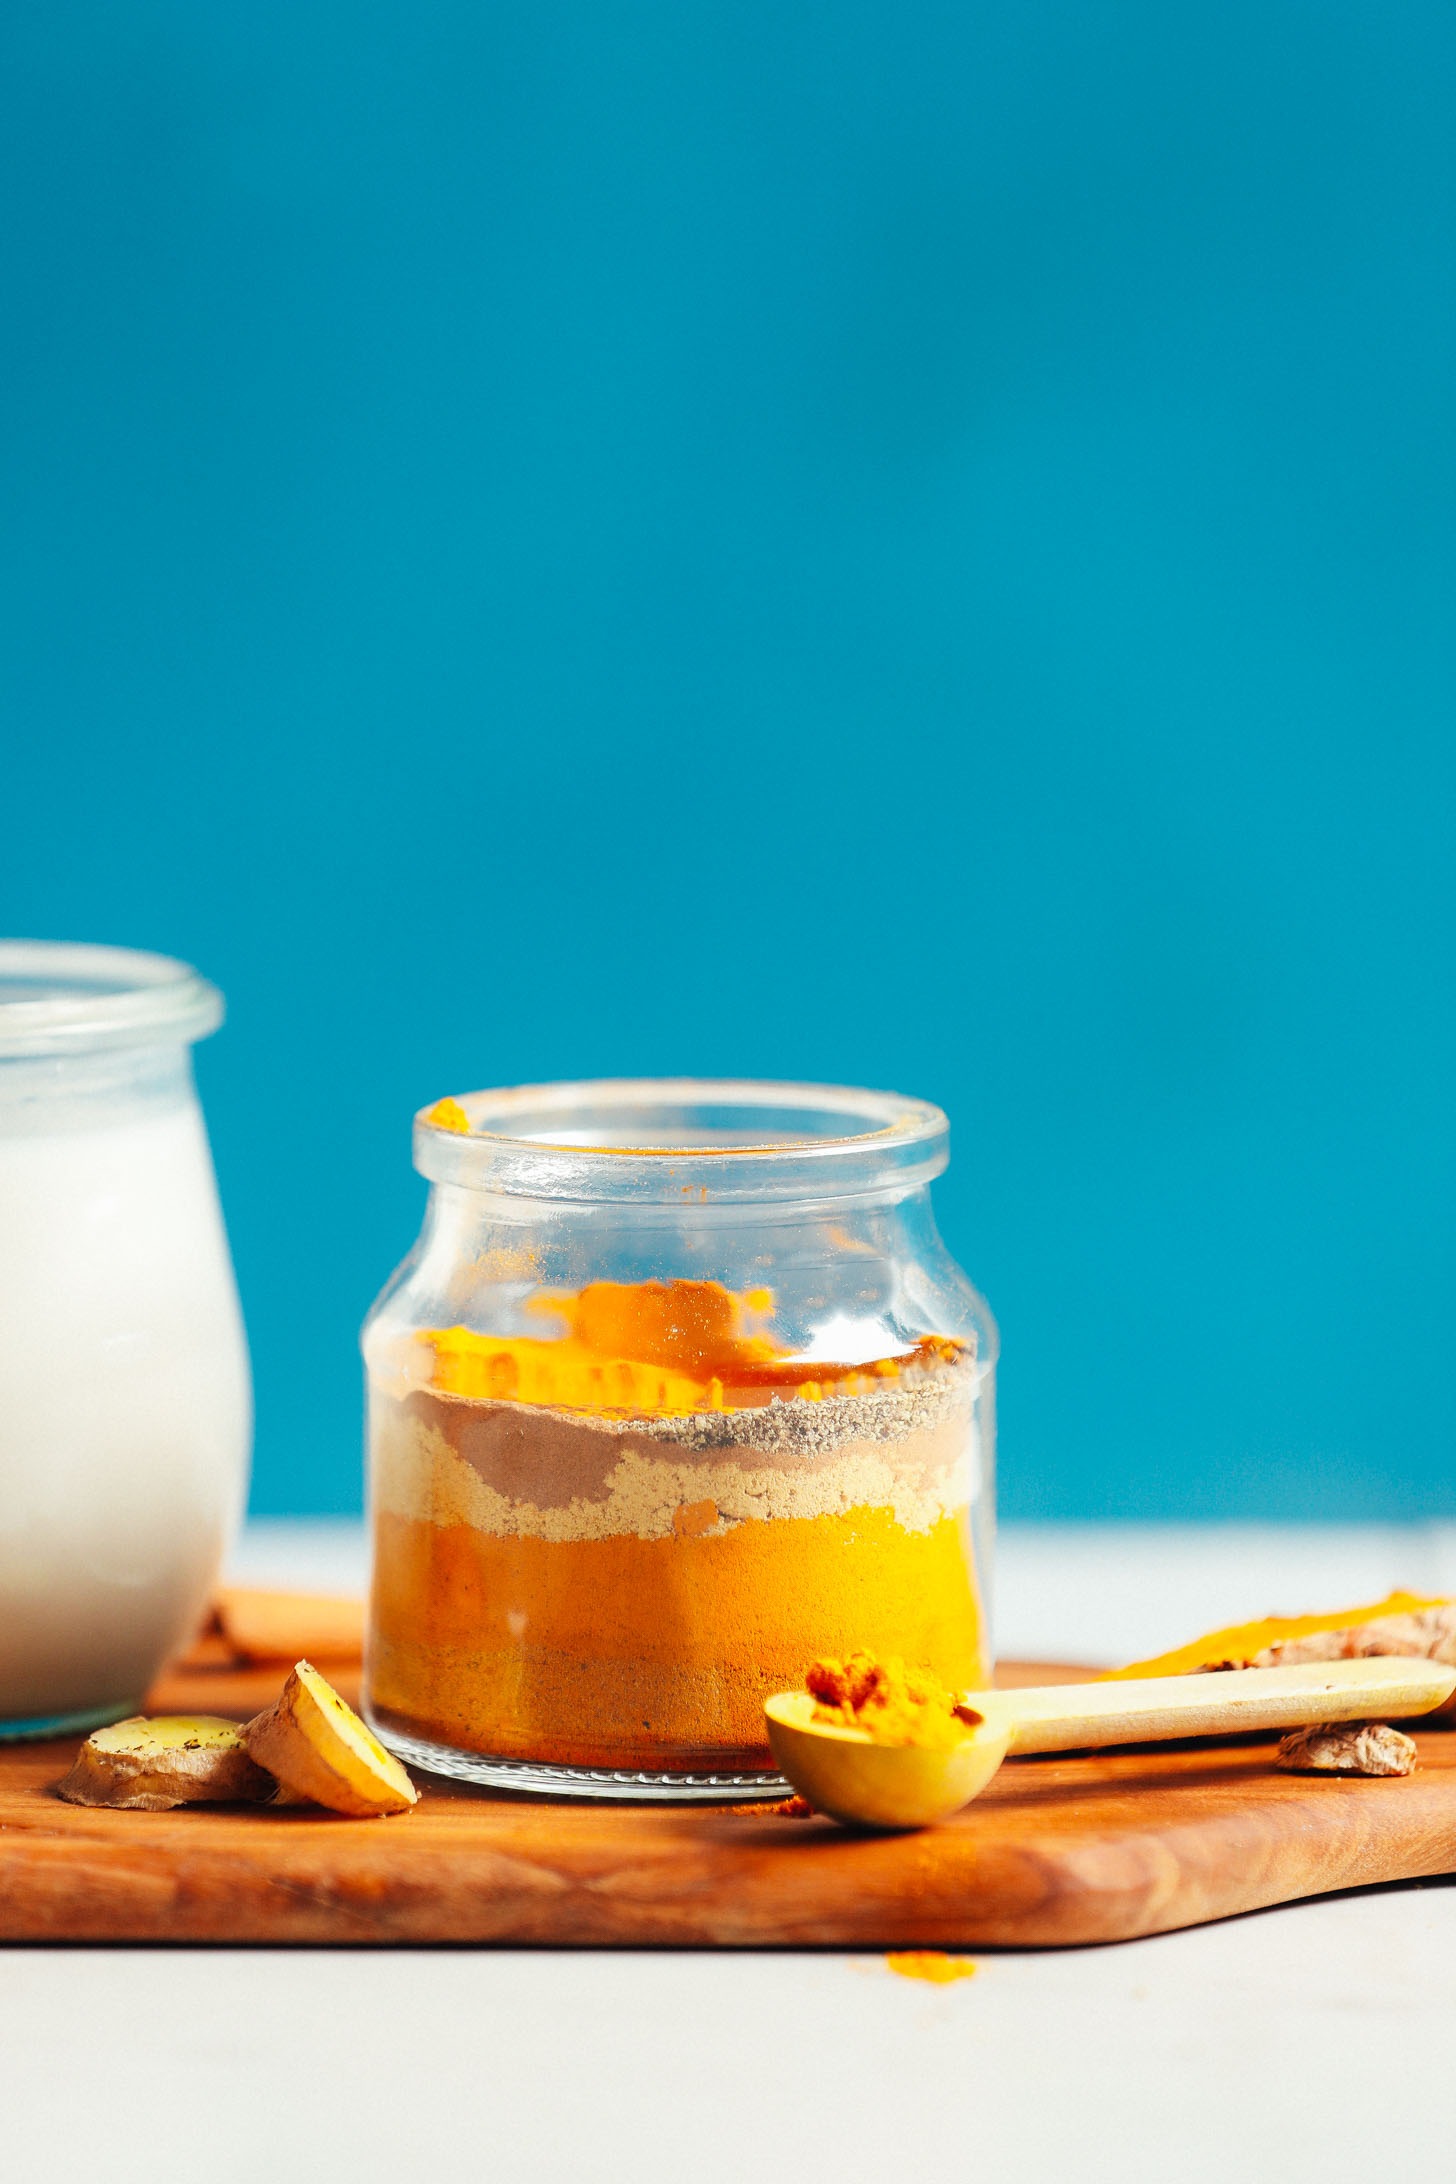 Small jar and spoonful filled with our homemade easy golden milk mix recipe